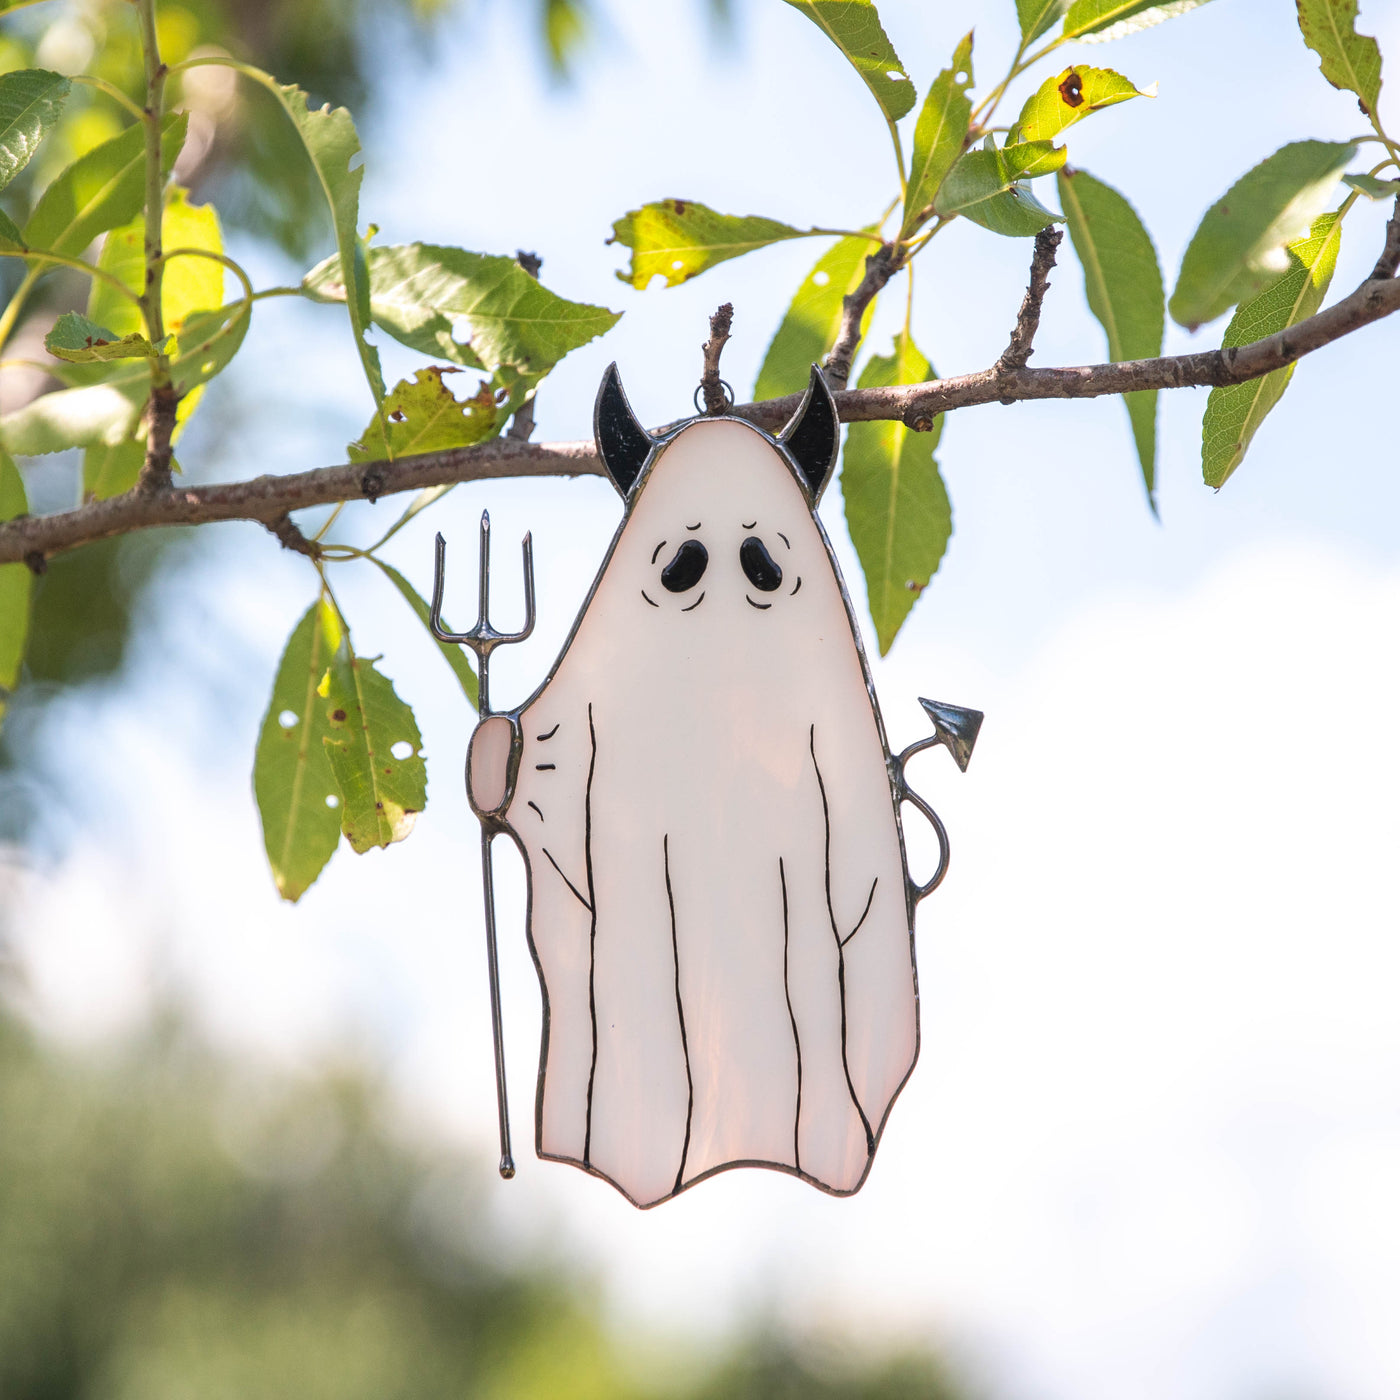 Stained glass suncatcher of ghost with pitchfork